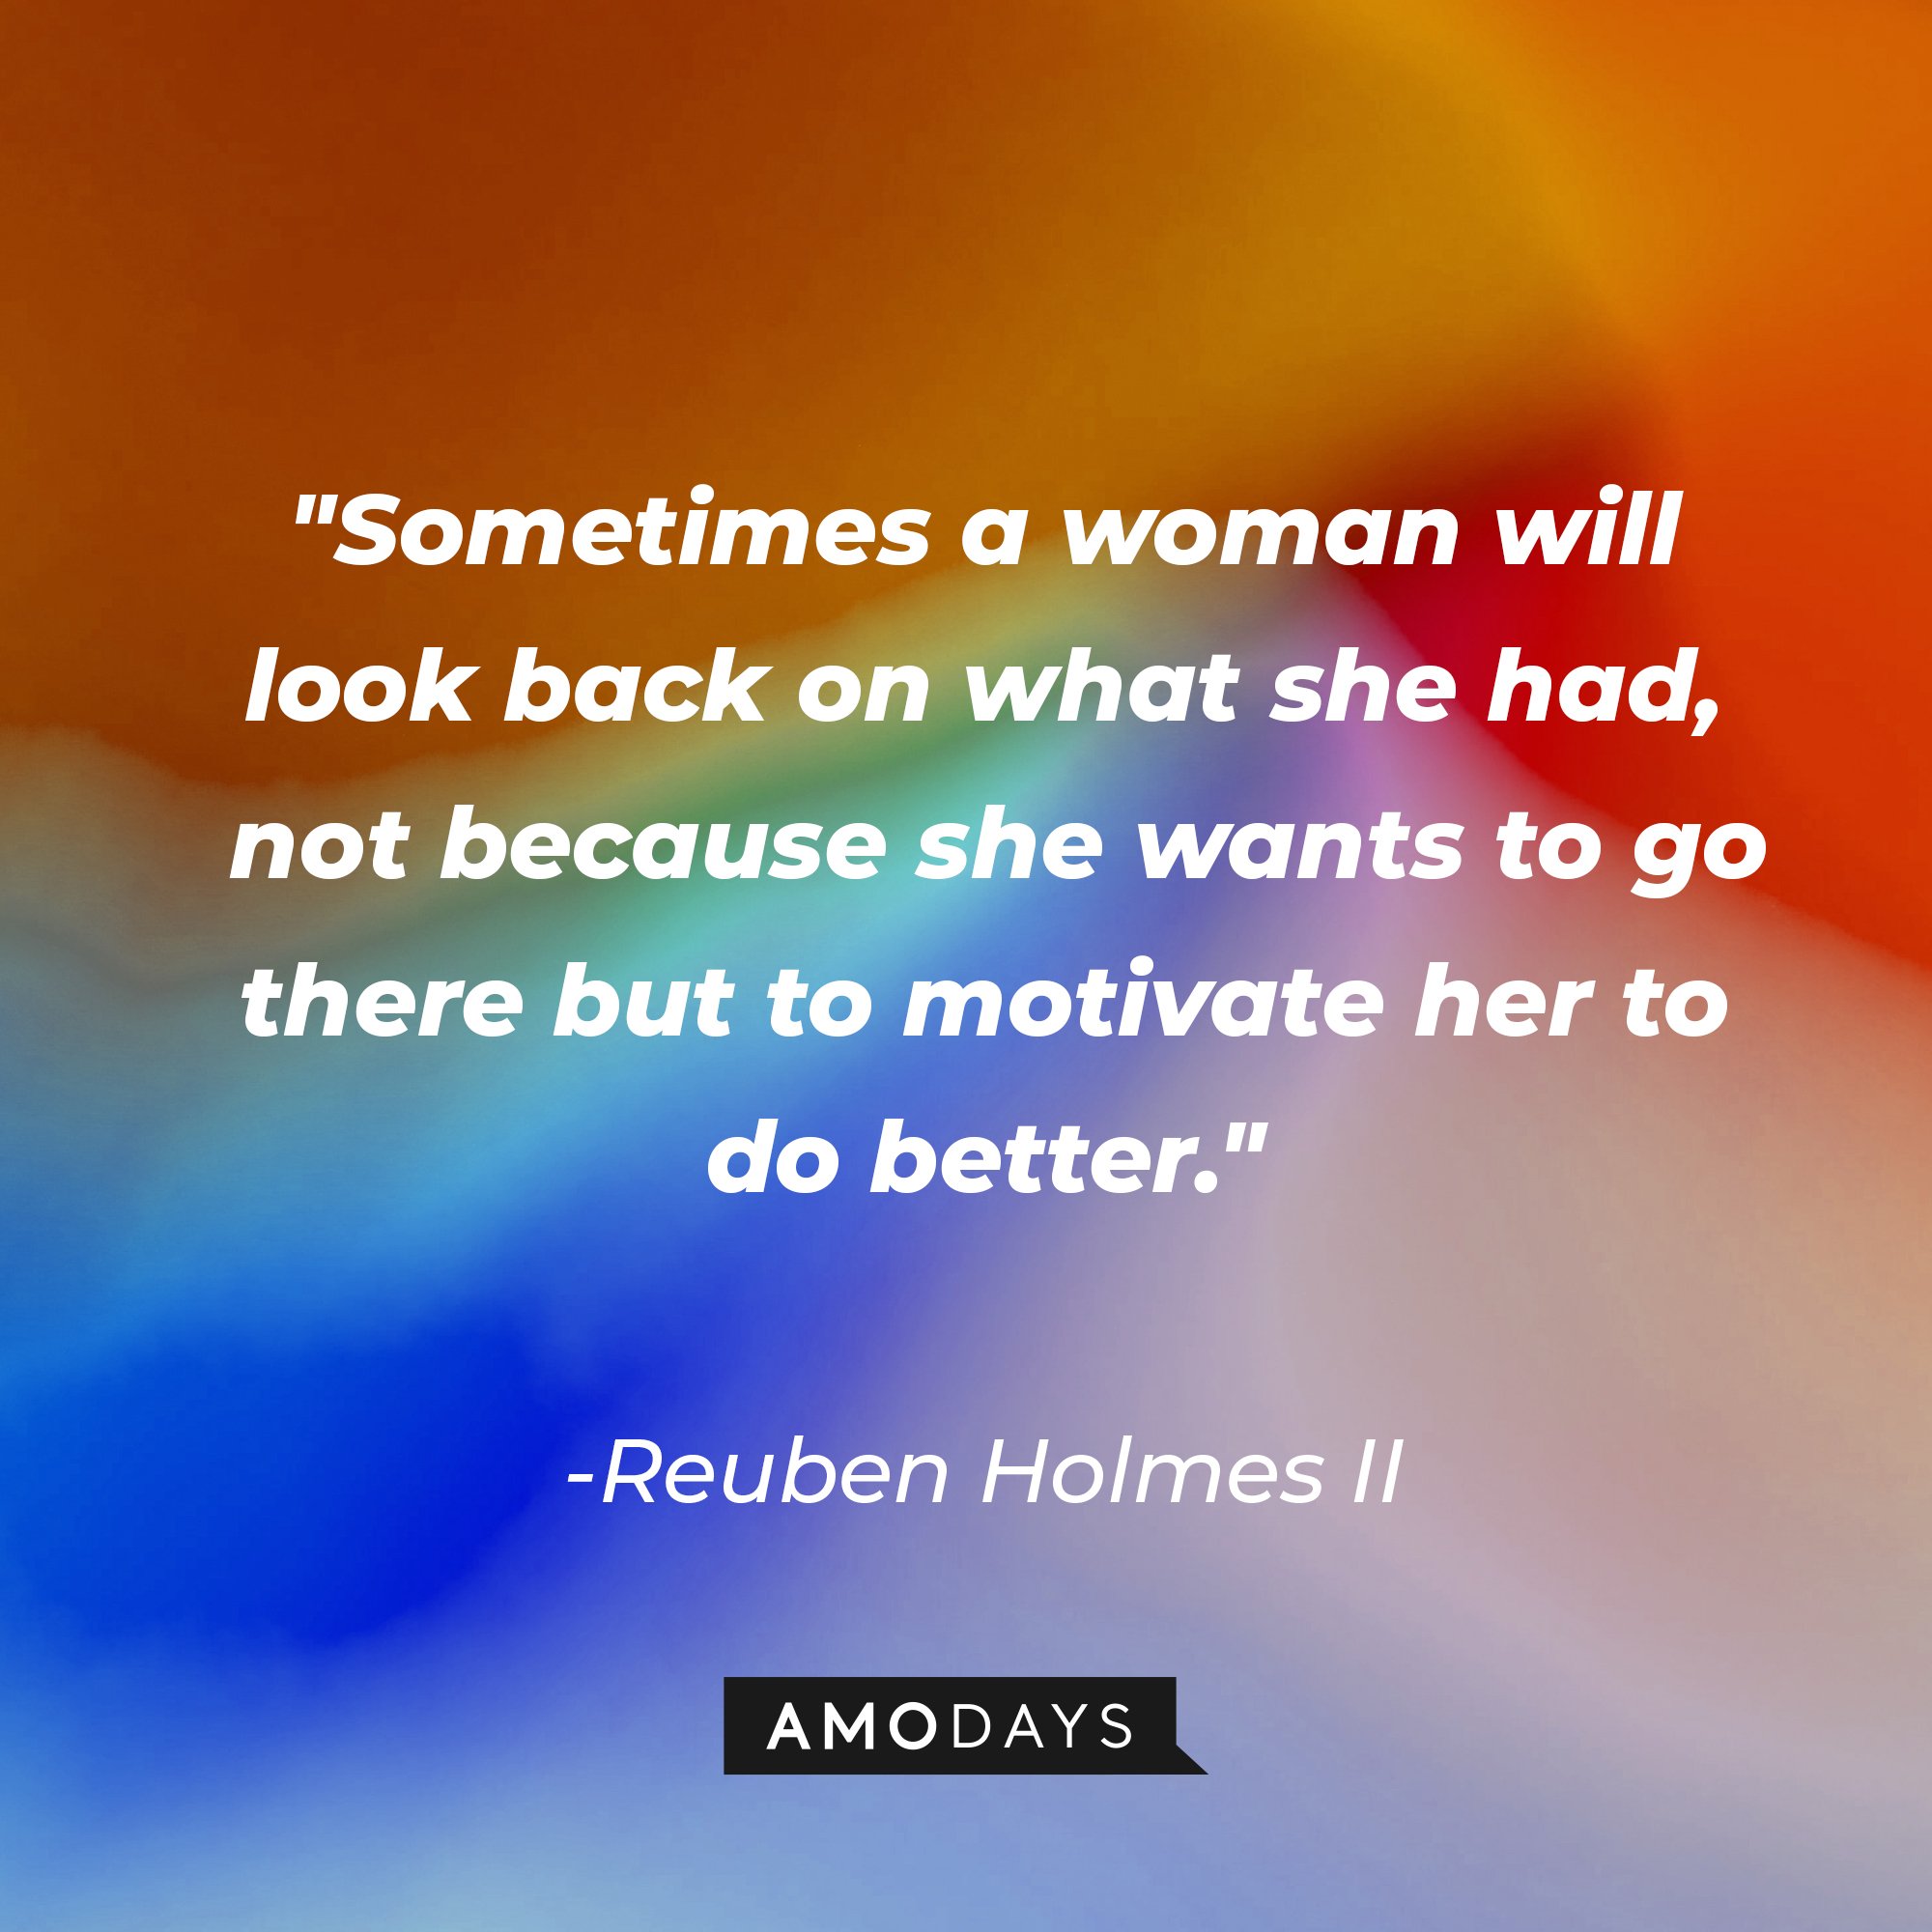 Reuben Holmes II's quote: "Sometimes a woman will look back on what she had, not because she wants to go there but to motivate her to do better." | Image: AmoDays